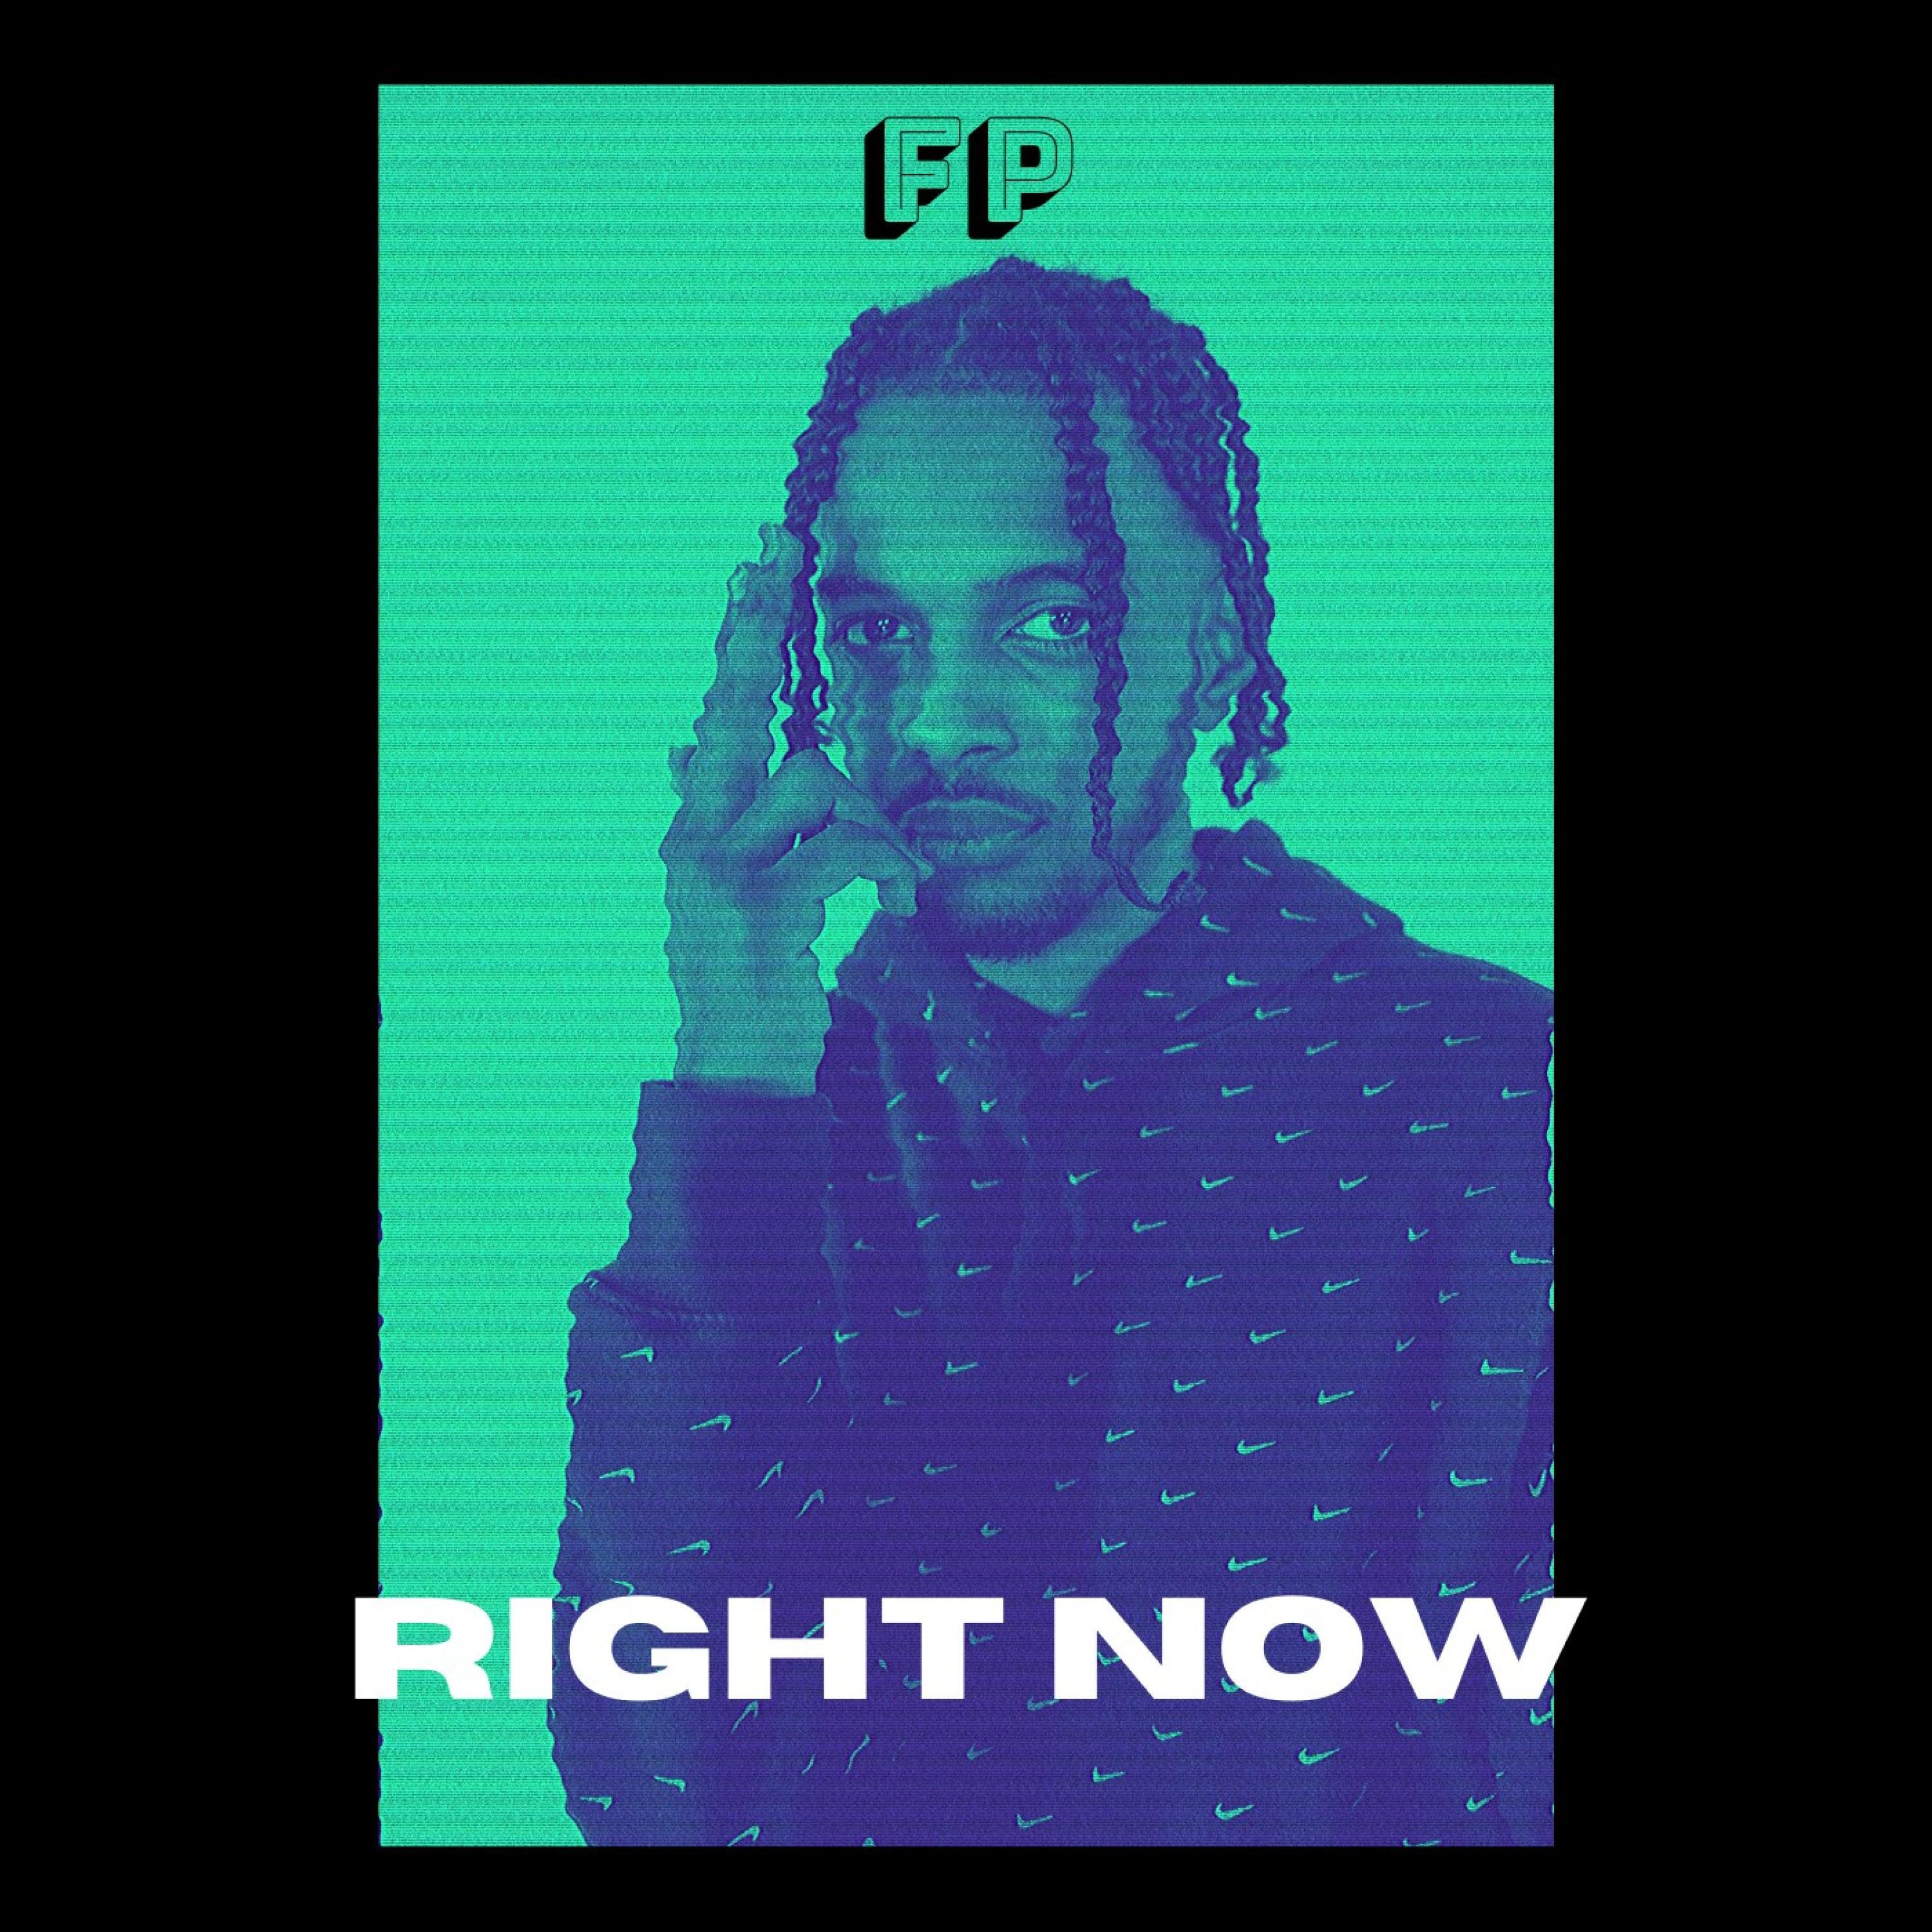 fp - Right Now